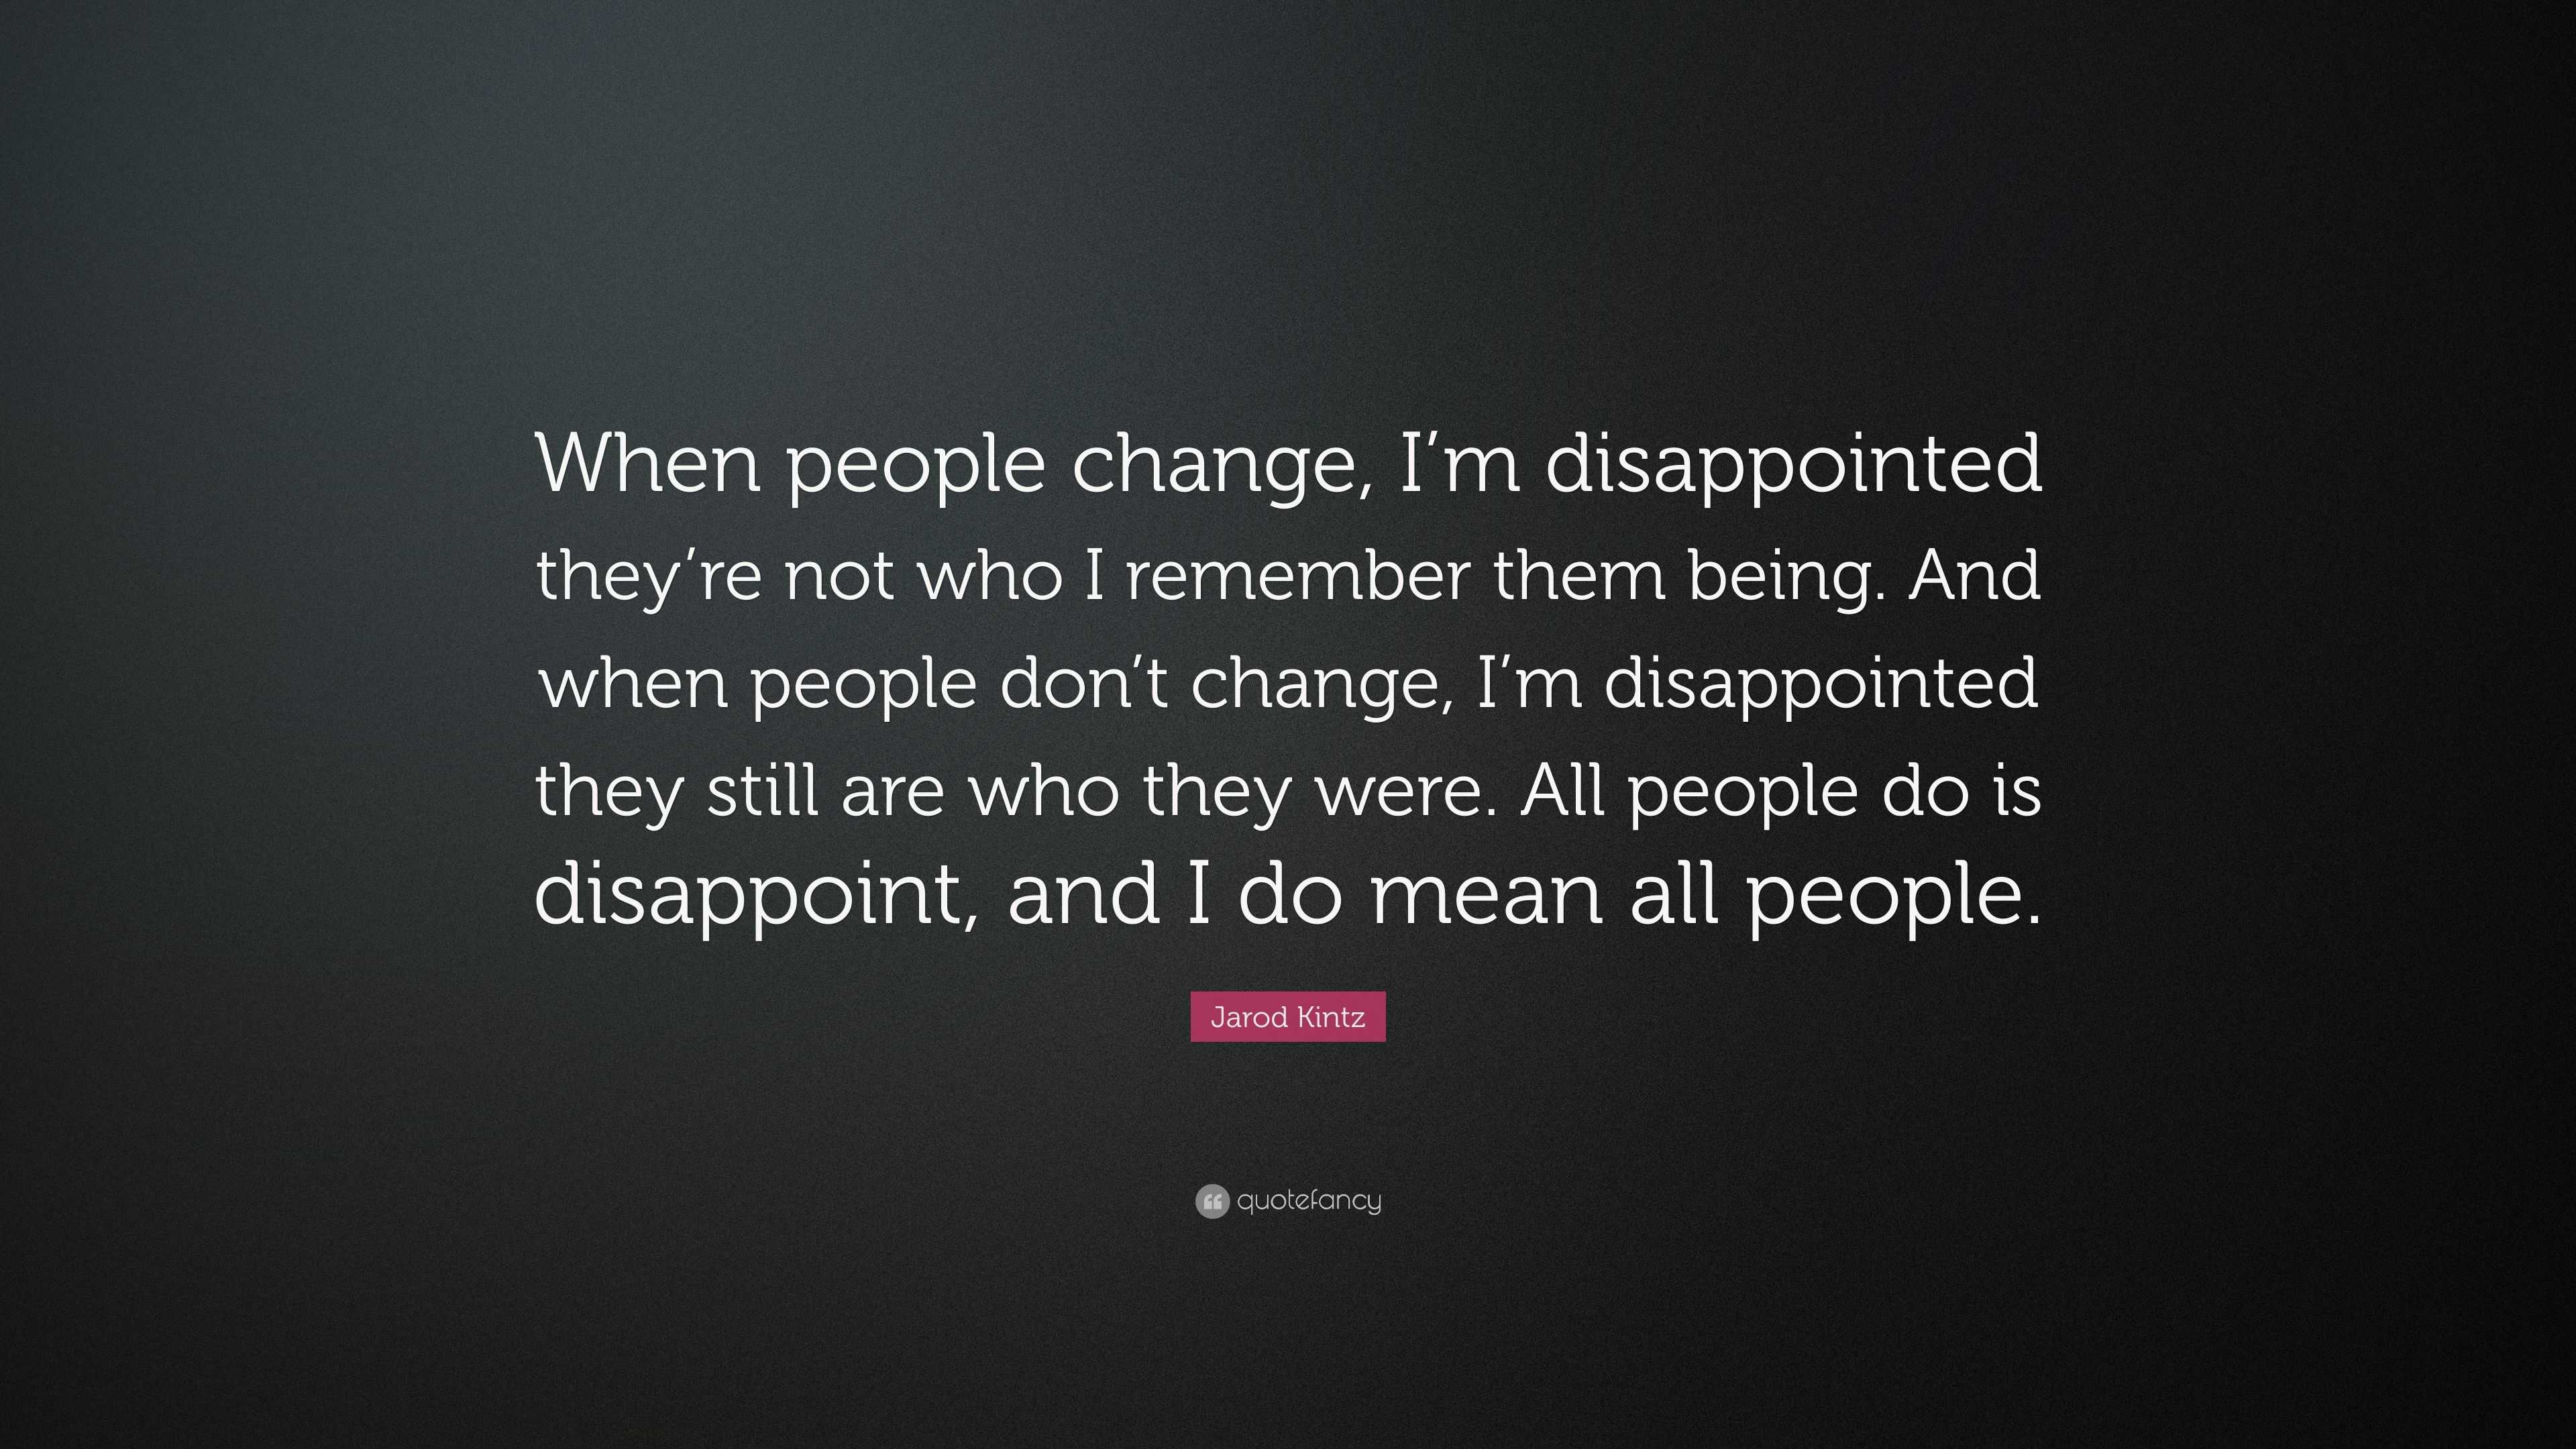 Jarod Kintz Quote: “When people change, I’m disappointed they’re not ...